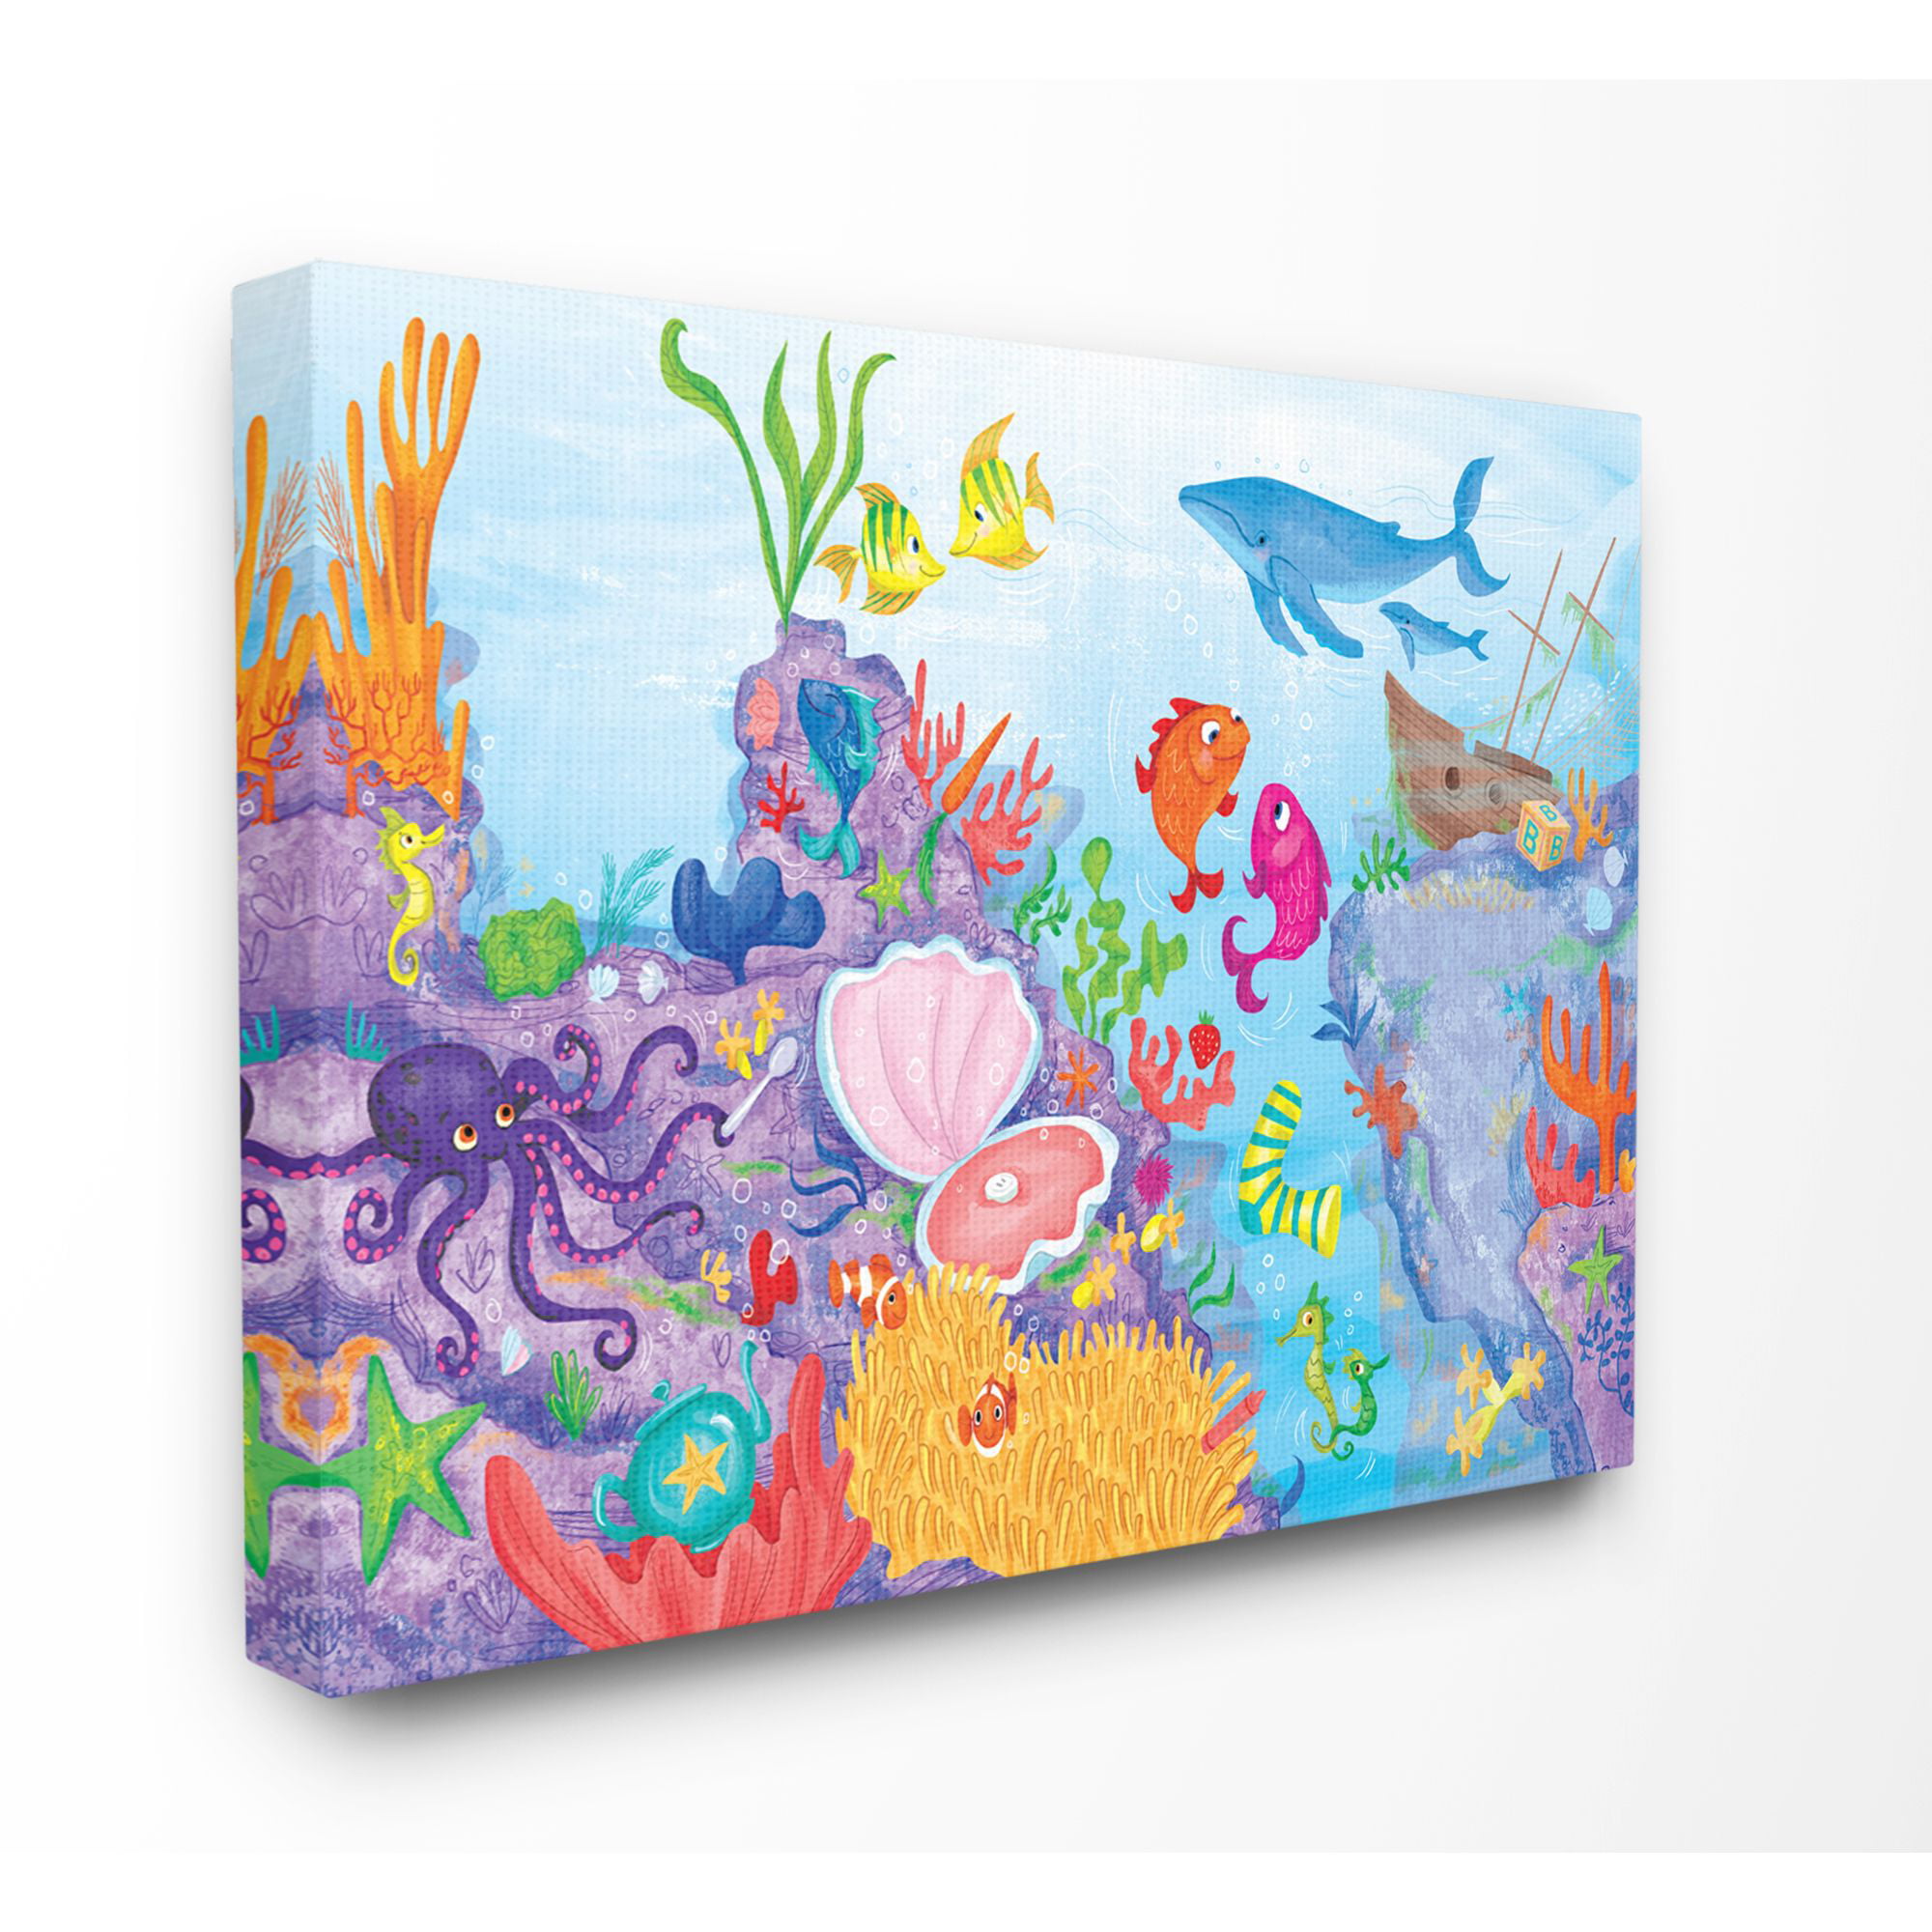 The Kids Room by Stupell Colorful Ocean Sea Life Fish Blue Purple Kids Nursery Painting Canvas Wall Art by The Saturday Evening Post, Size: 36 x 48